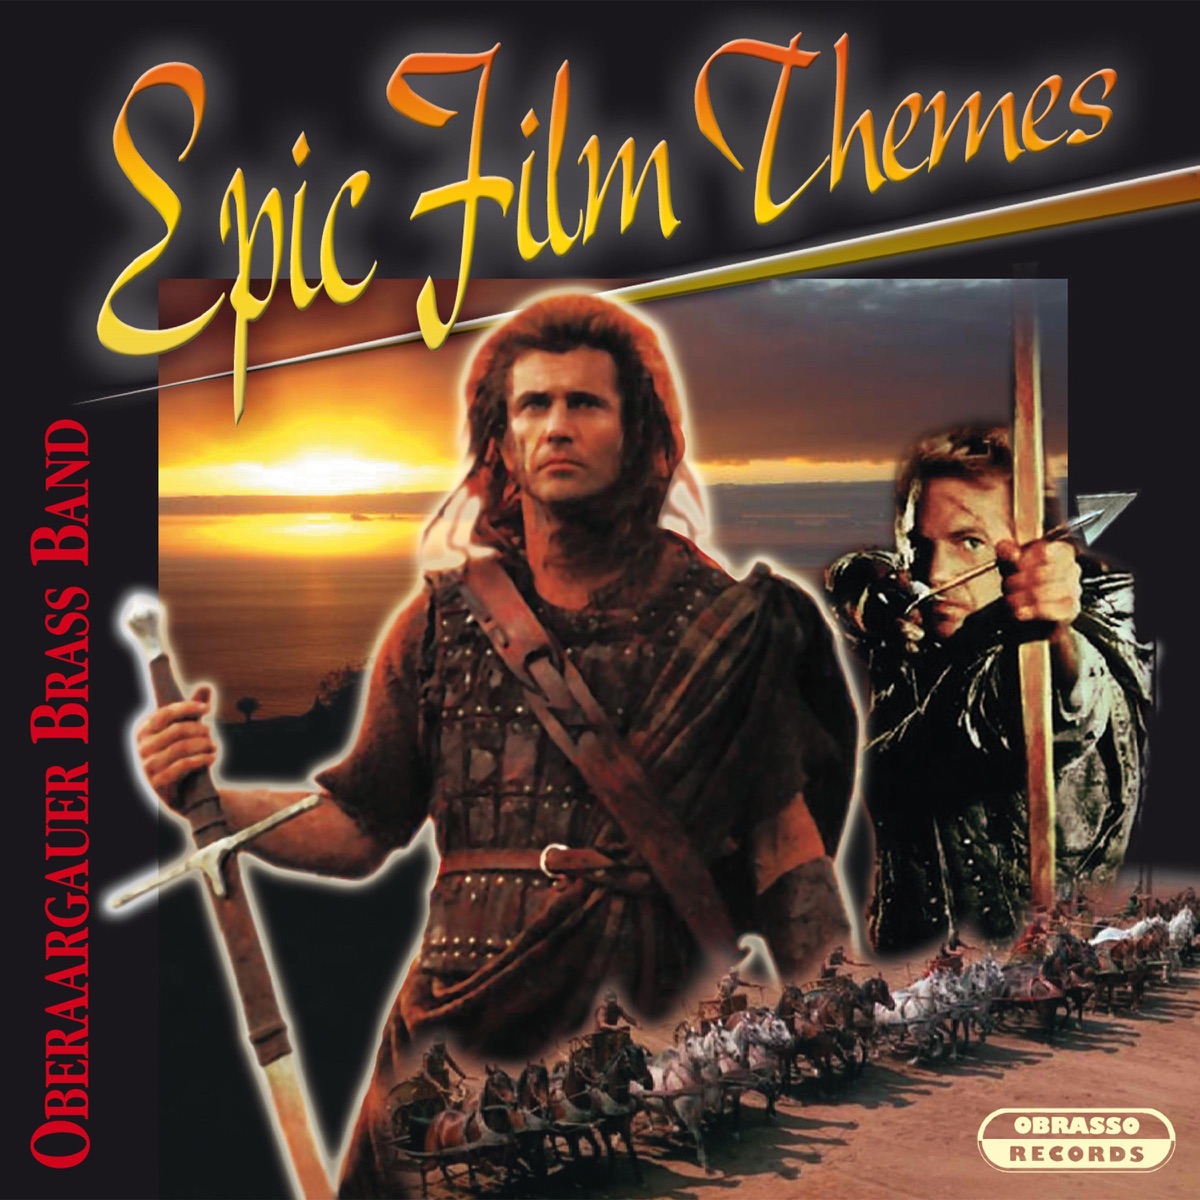 Oberaargauer Brass Band & Manfred Obrecht - Epic Film Themes (Music Inspired By the Film)